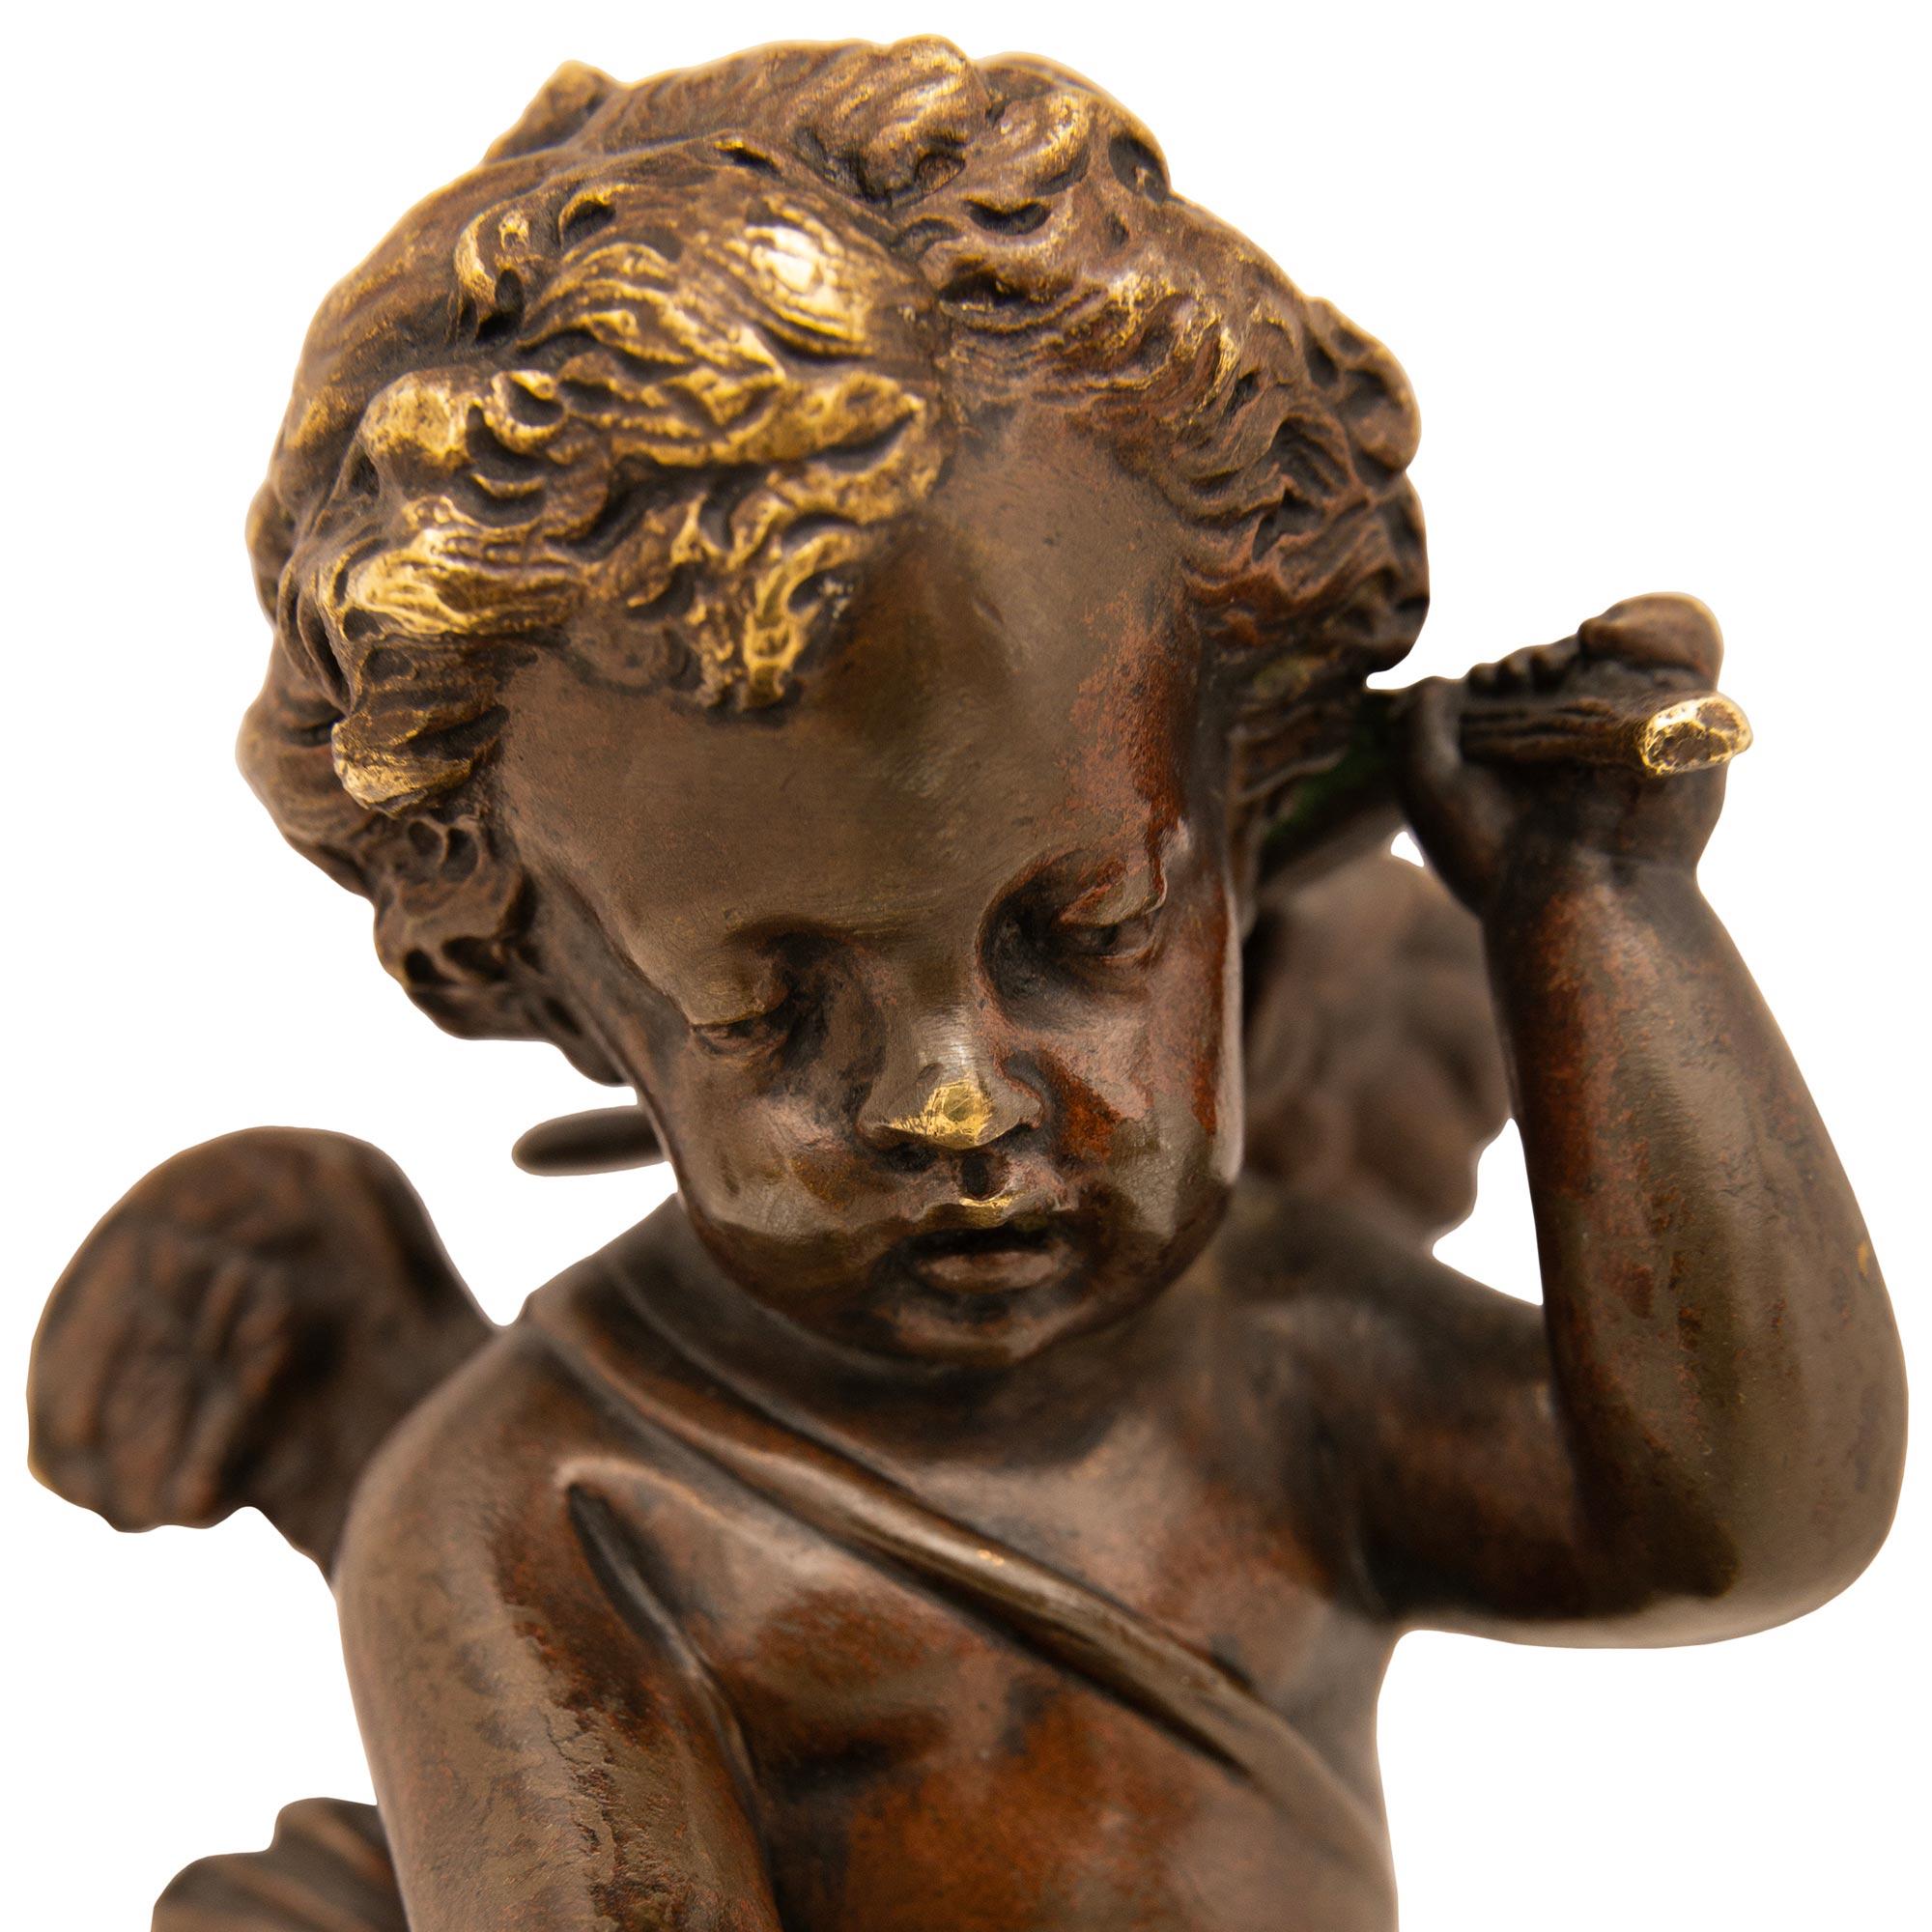 A lovely true pair of French 19th century Rouge Griotte marble and patinated Bronze cherub statues. Each charming statue is raised on a circular Rouge Griotte marble base supporting the winged cherubs above. One of the winged cherubs is gently